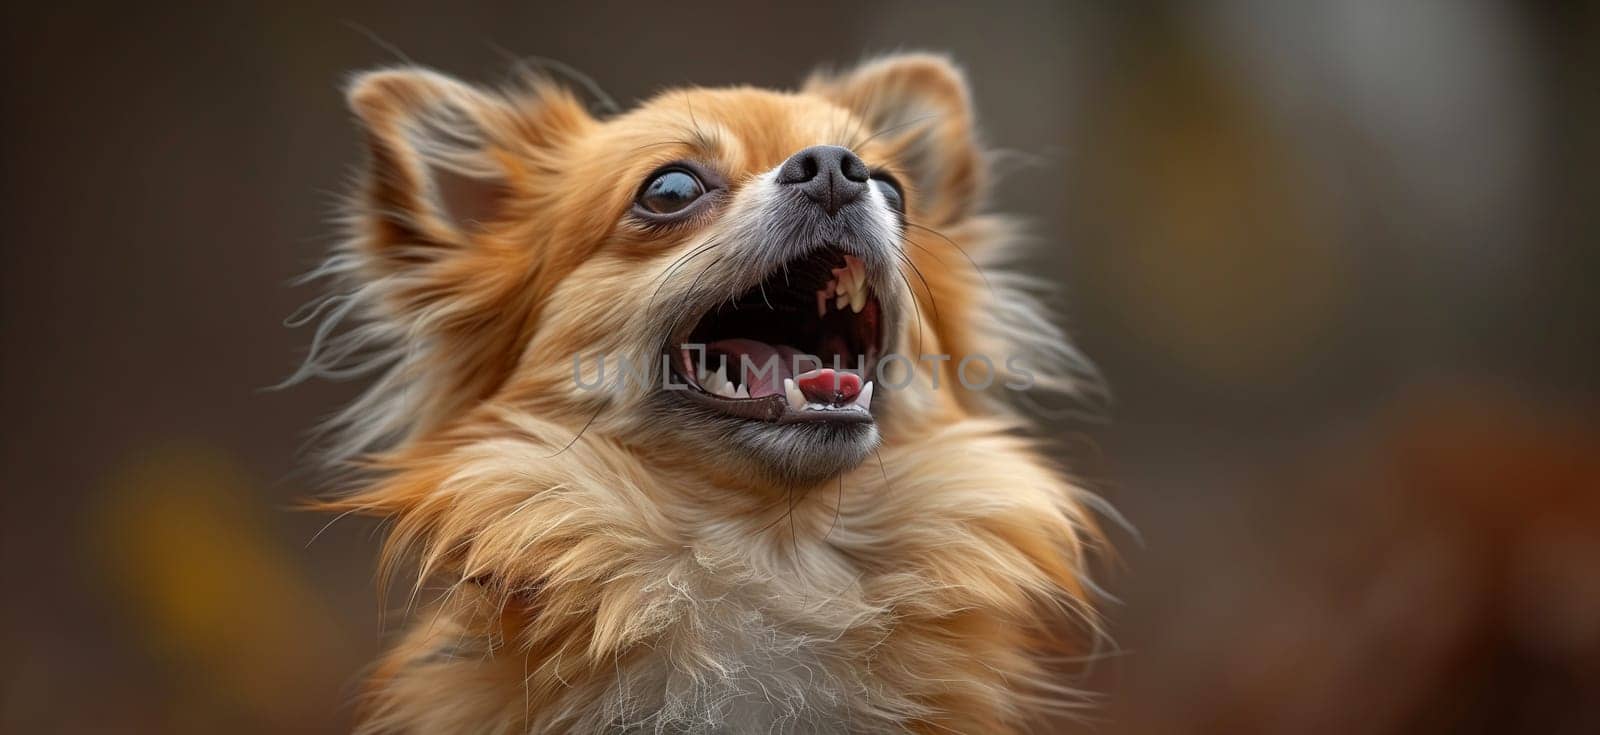 Close up of a Chihuahua showing its fangs and open mouth by richwolf